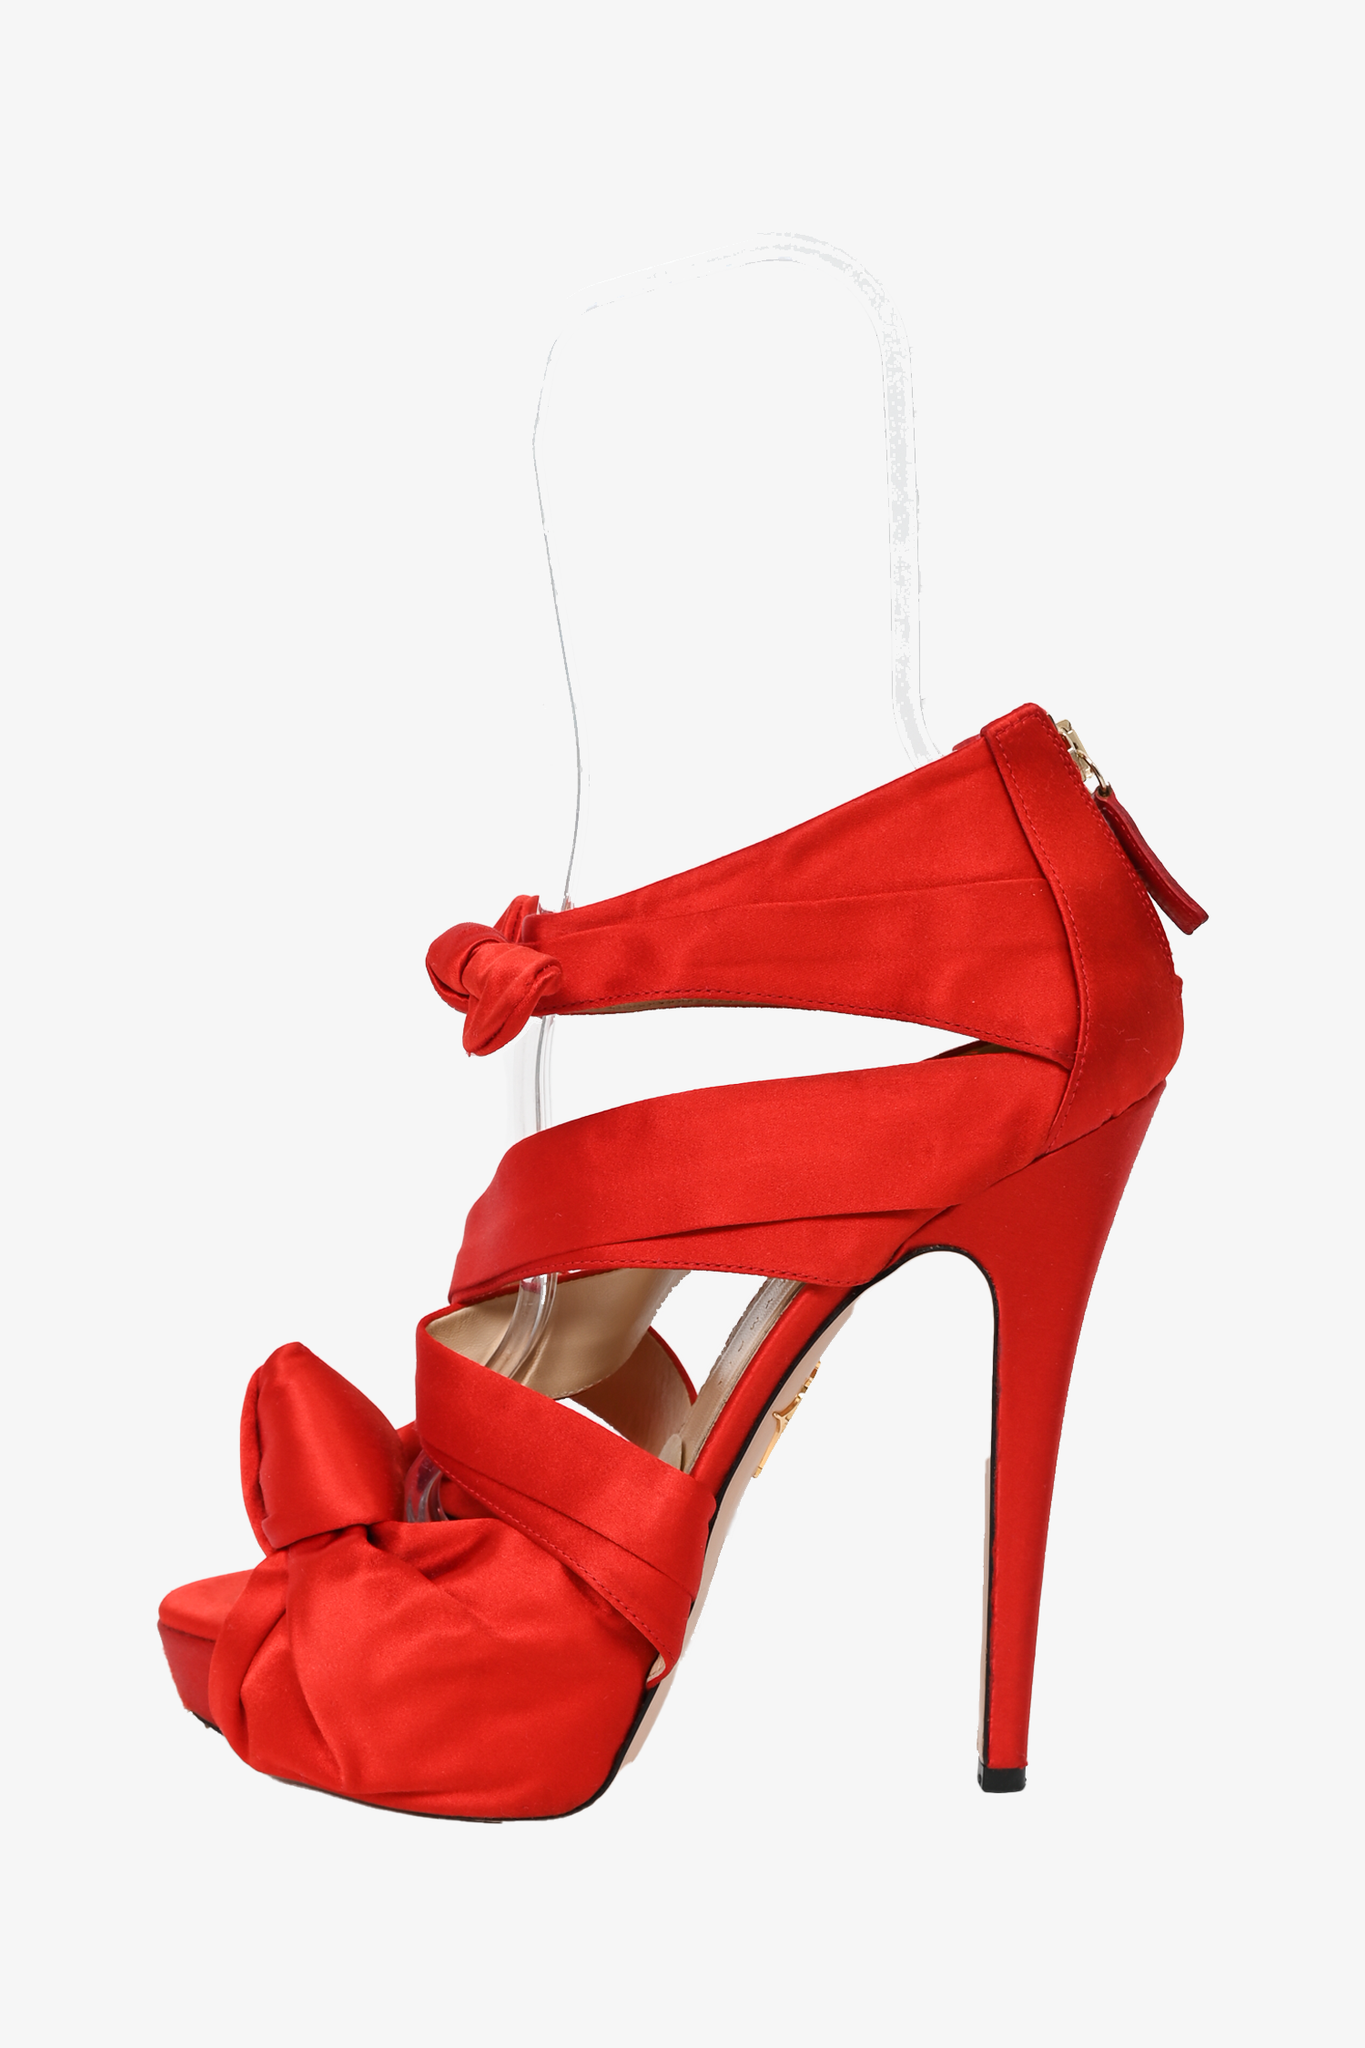 Charlotte Olympia Red Satin Ribbon Heels Size 39